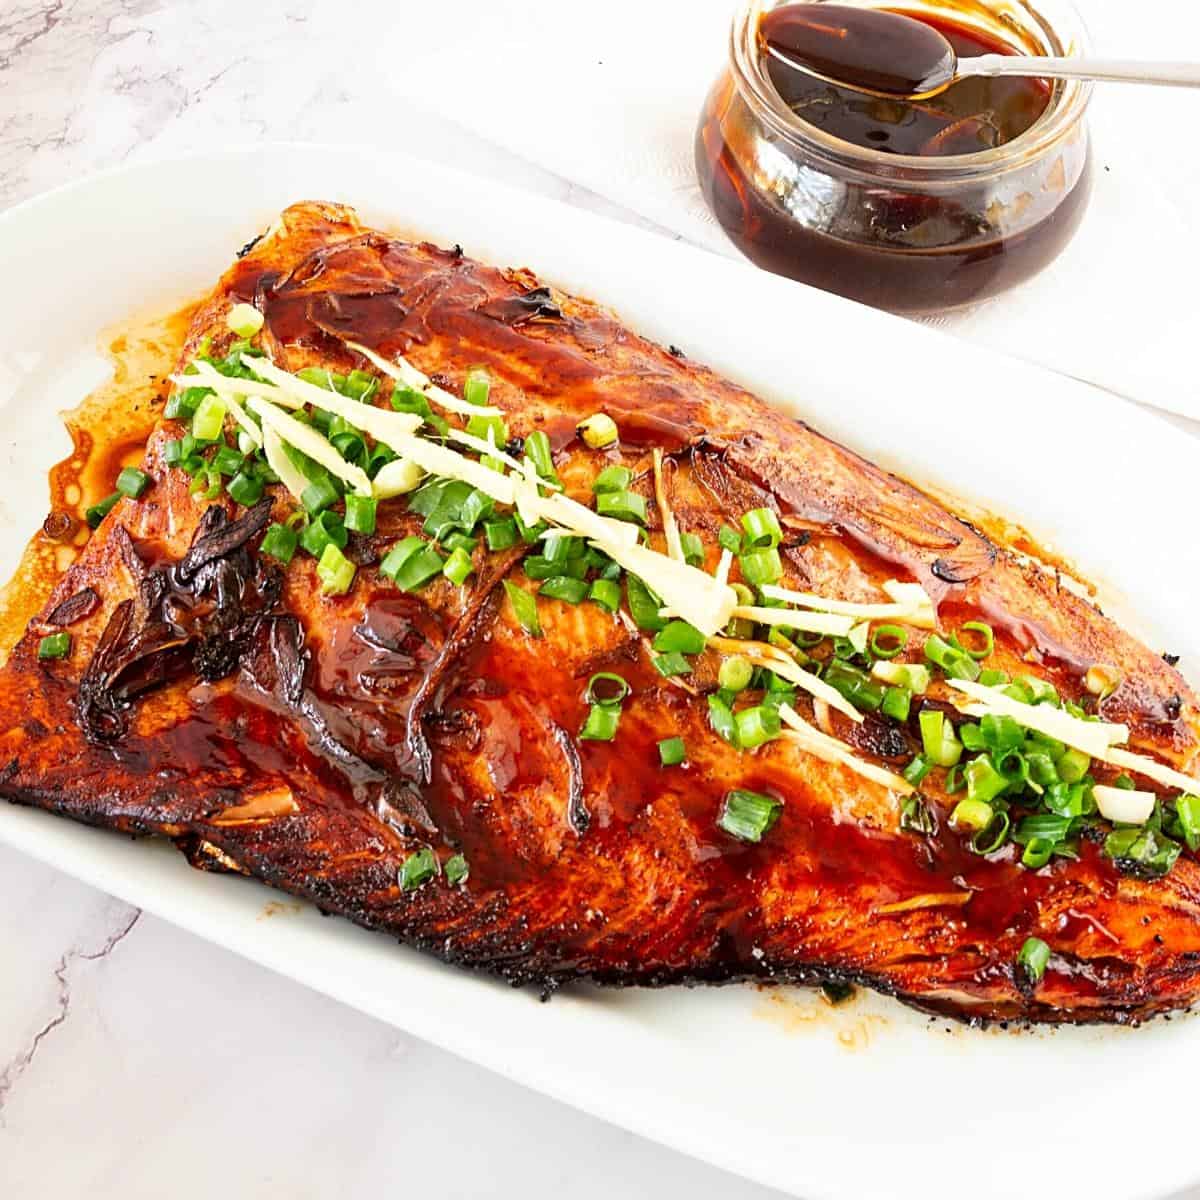 Baked salmon fillet in a platter with teriyaki sauce.